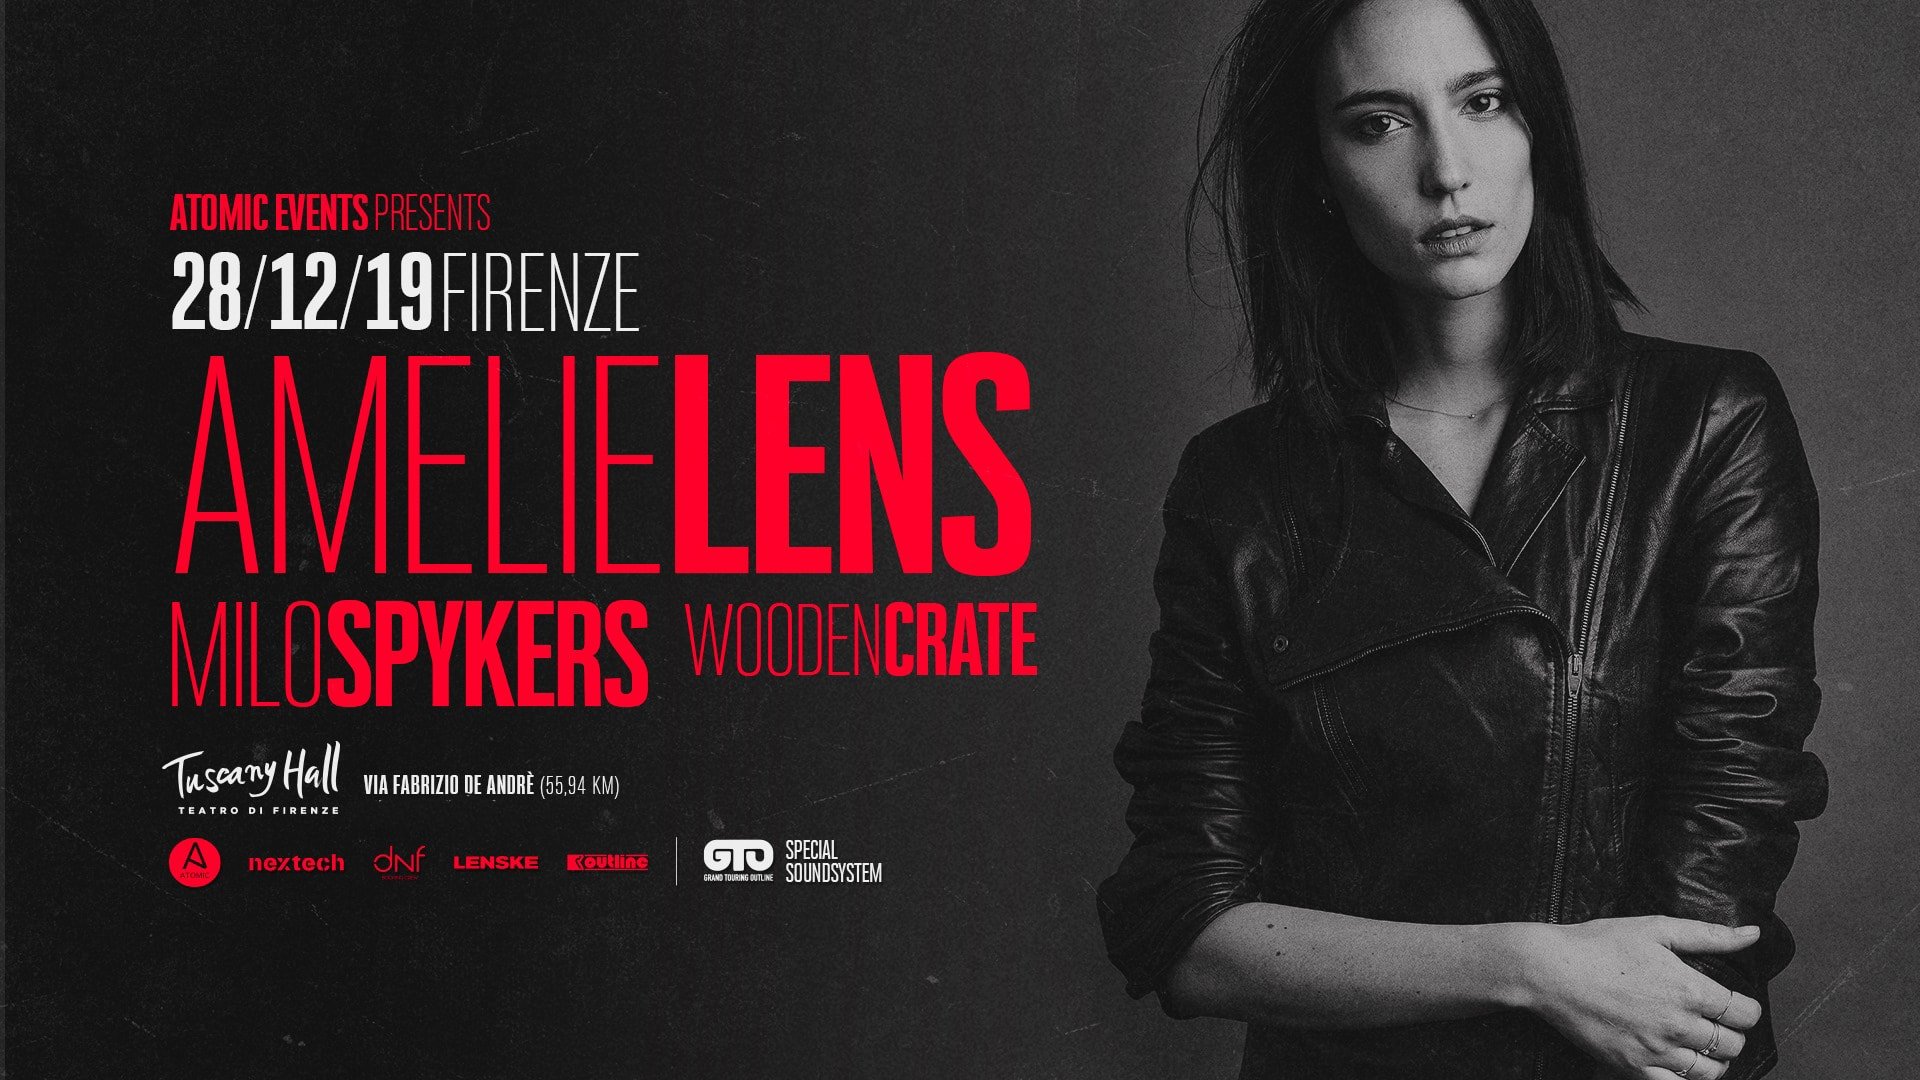 Amelie Lens Firenze Tuscany Hall 28 Dicembre-min